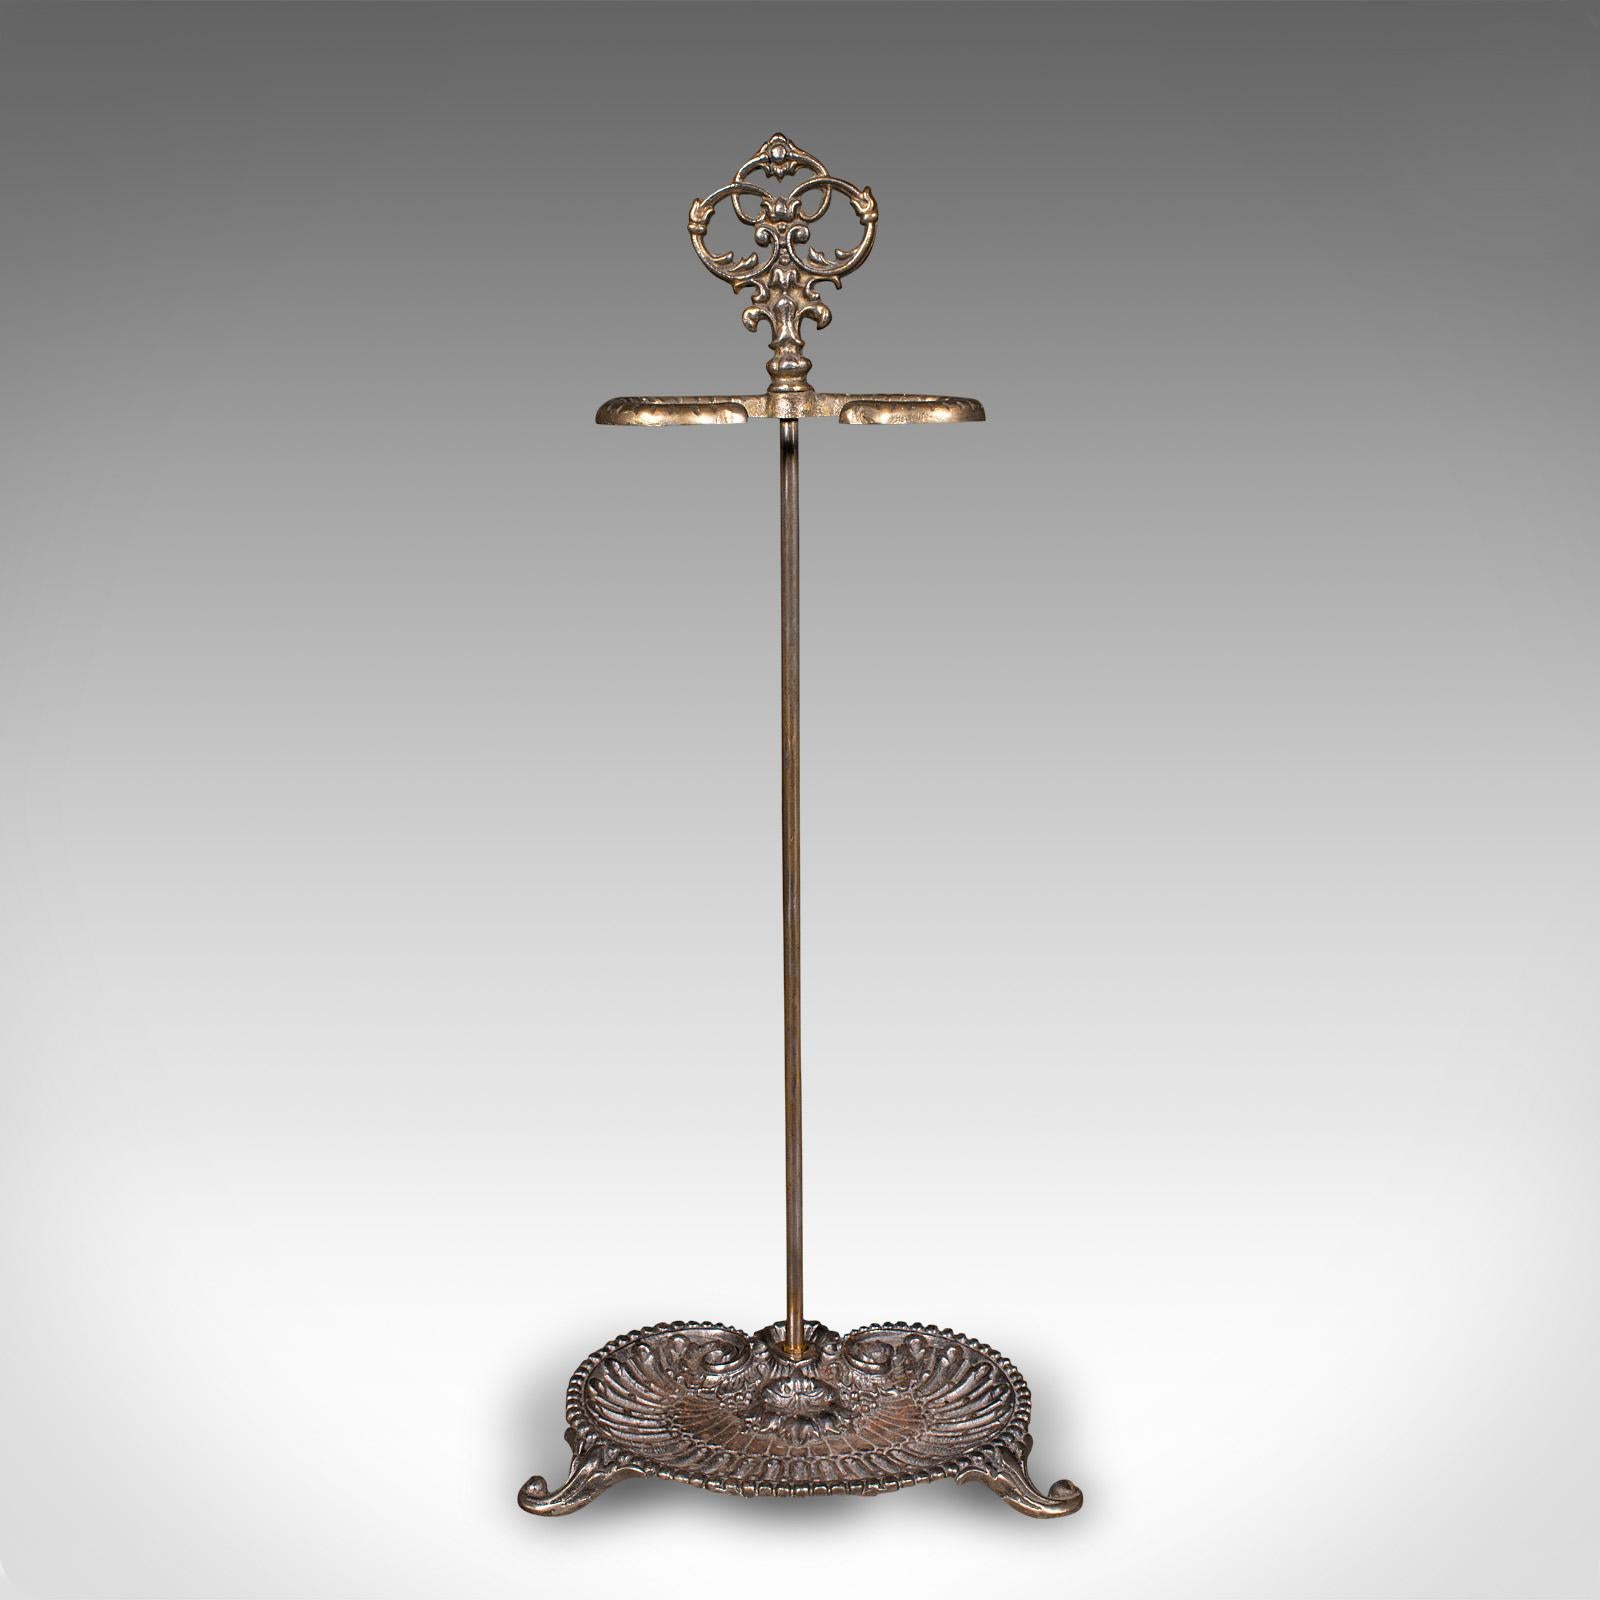 This is an antique Art Nouveau stick stand. An French, cast metal hallway umbrella rack, dating to the late Victorian period, circa 1900.

Of graceful Art Nouveau form, set to enhance your reception hall
Displays a desirable aged patina and in